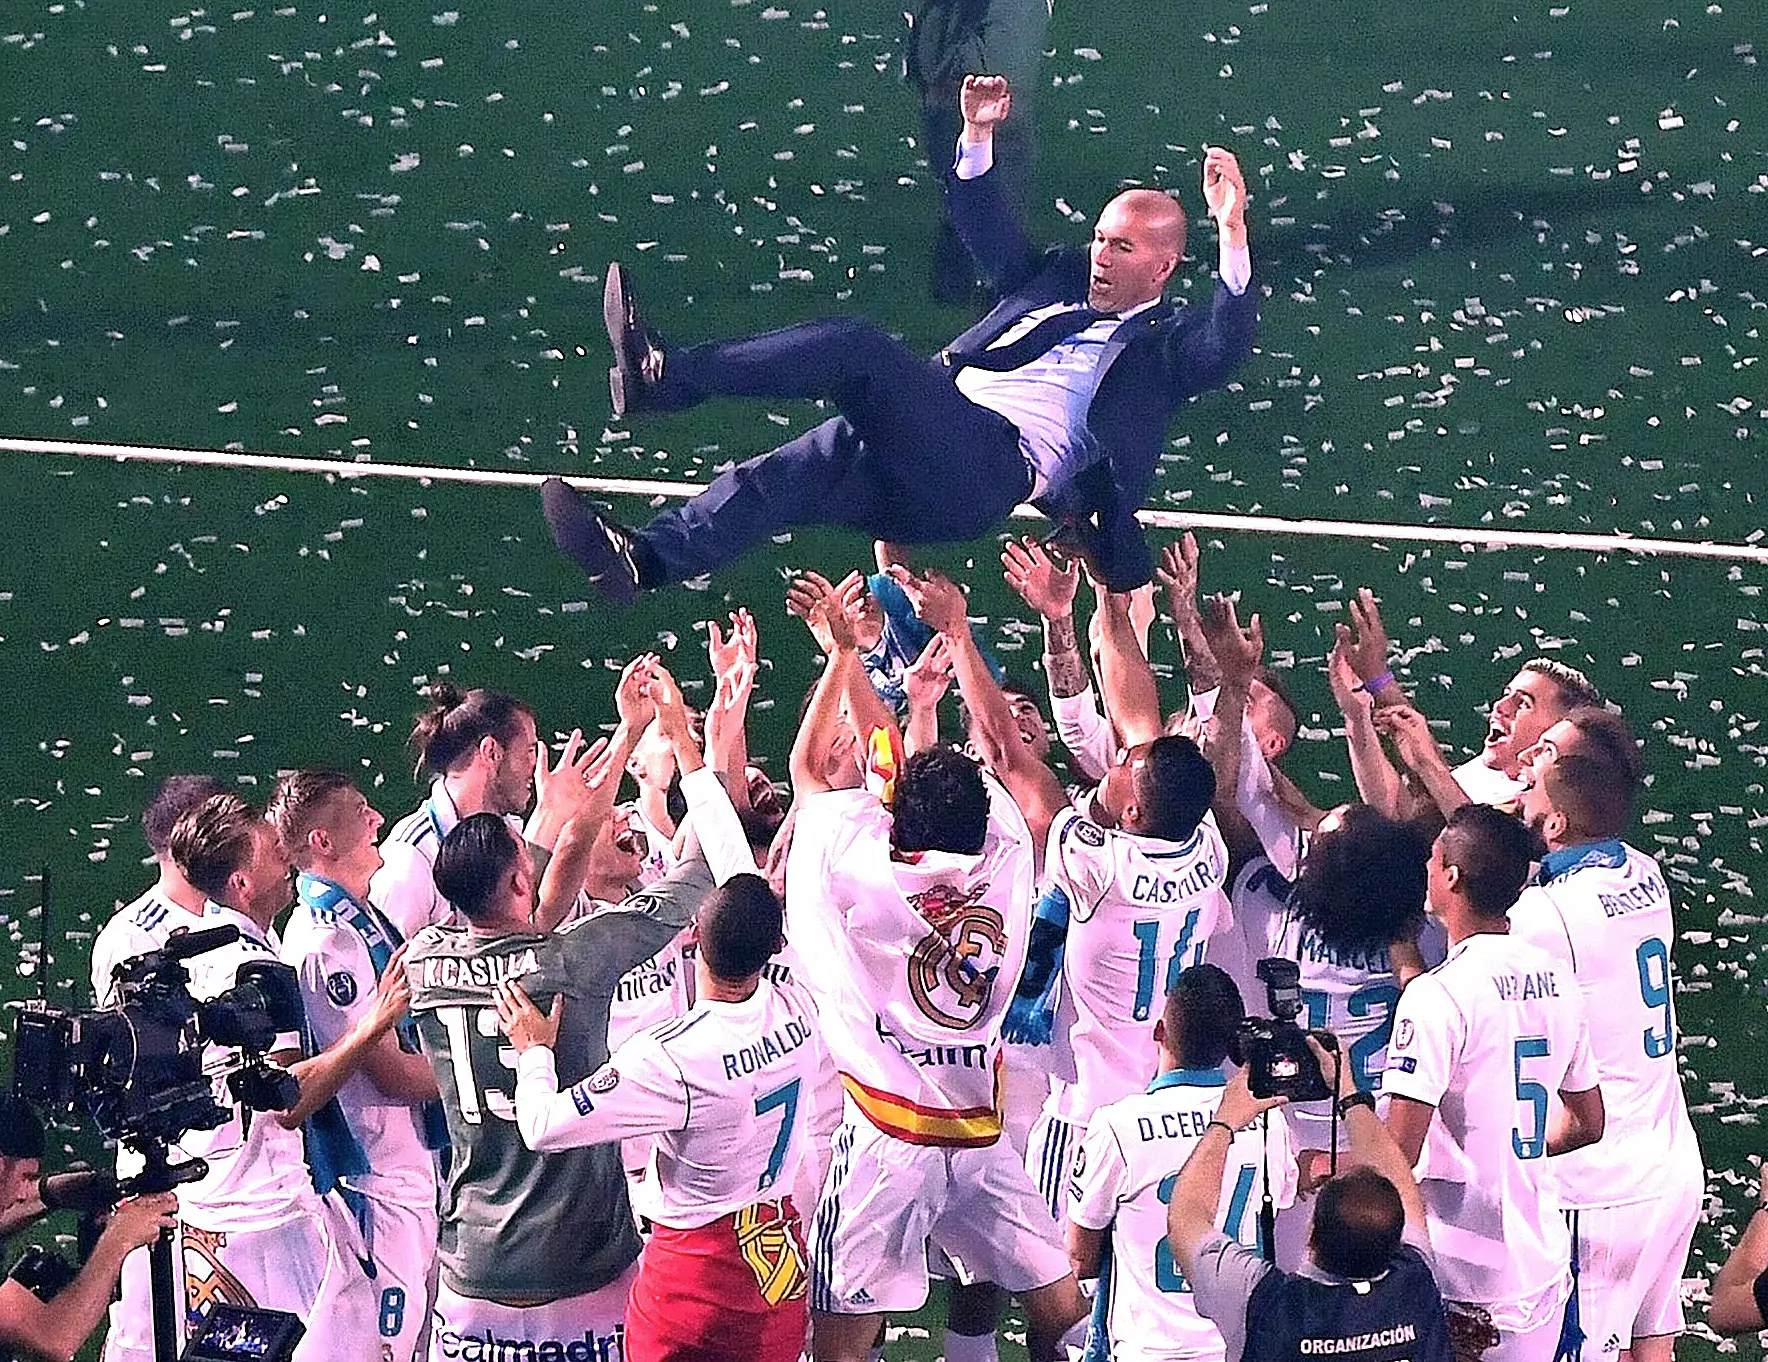 Just six days ago Zidane was being celebrated. Image: PA Images